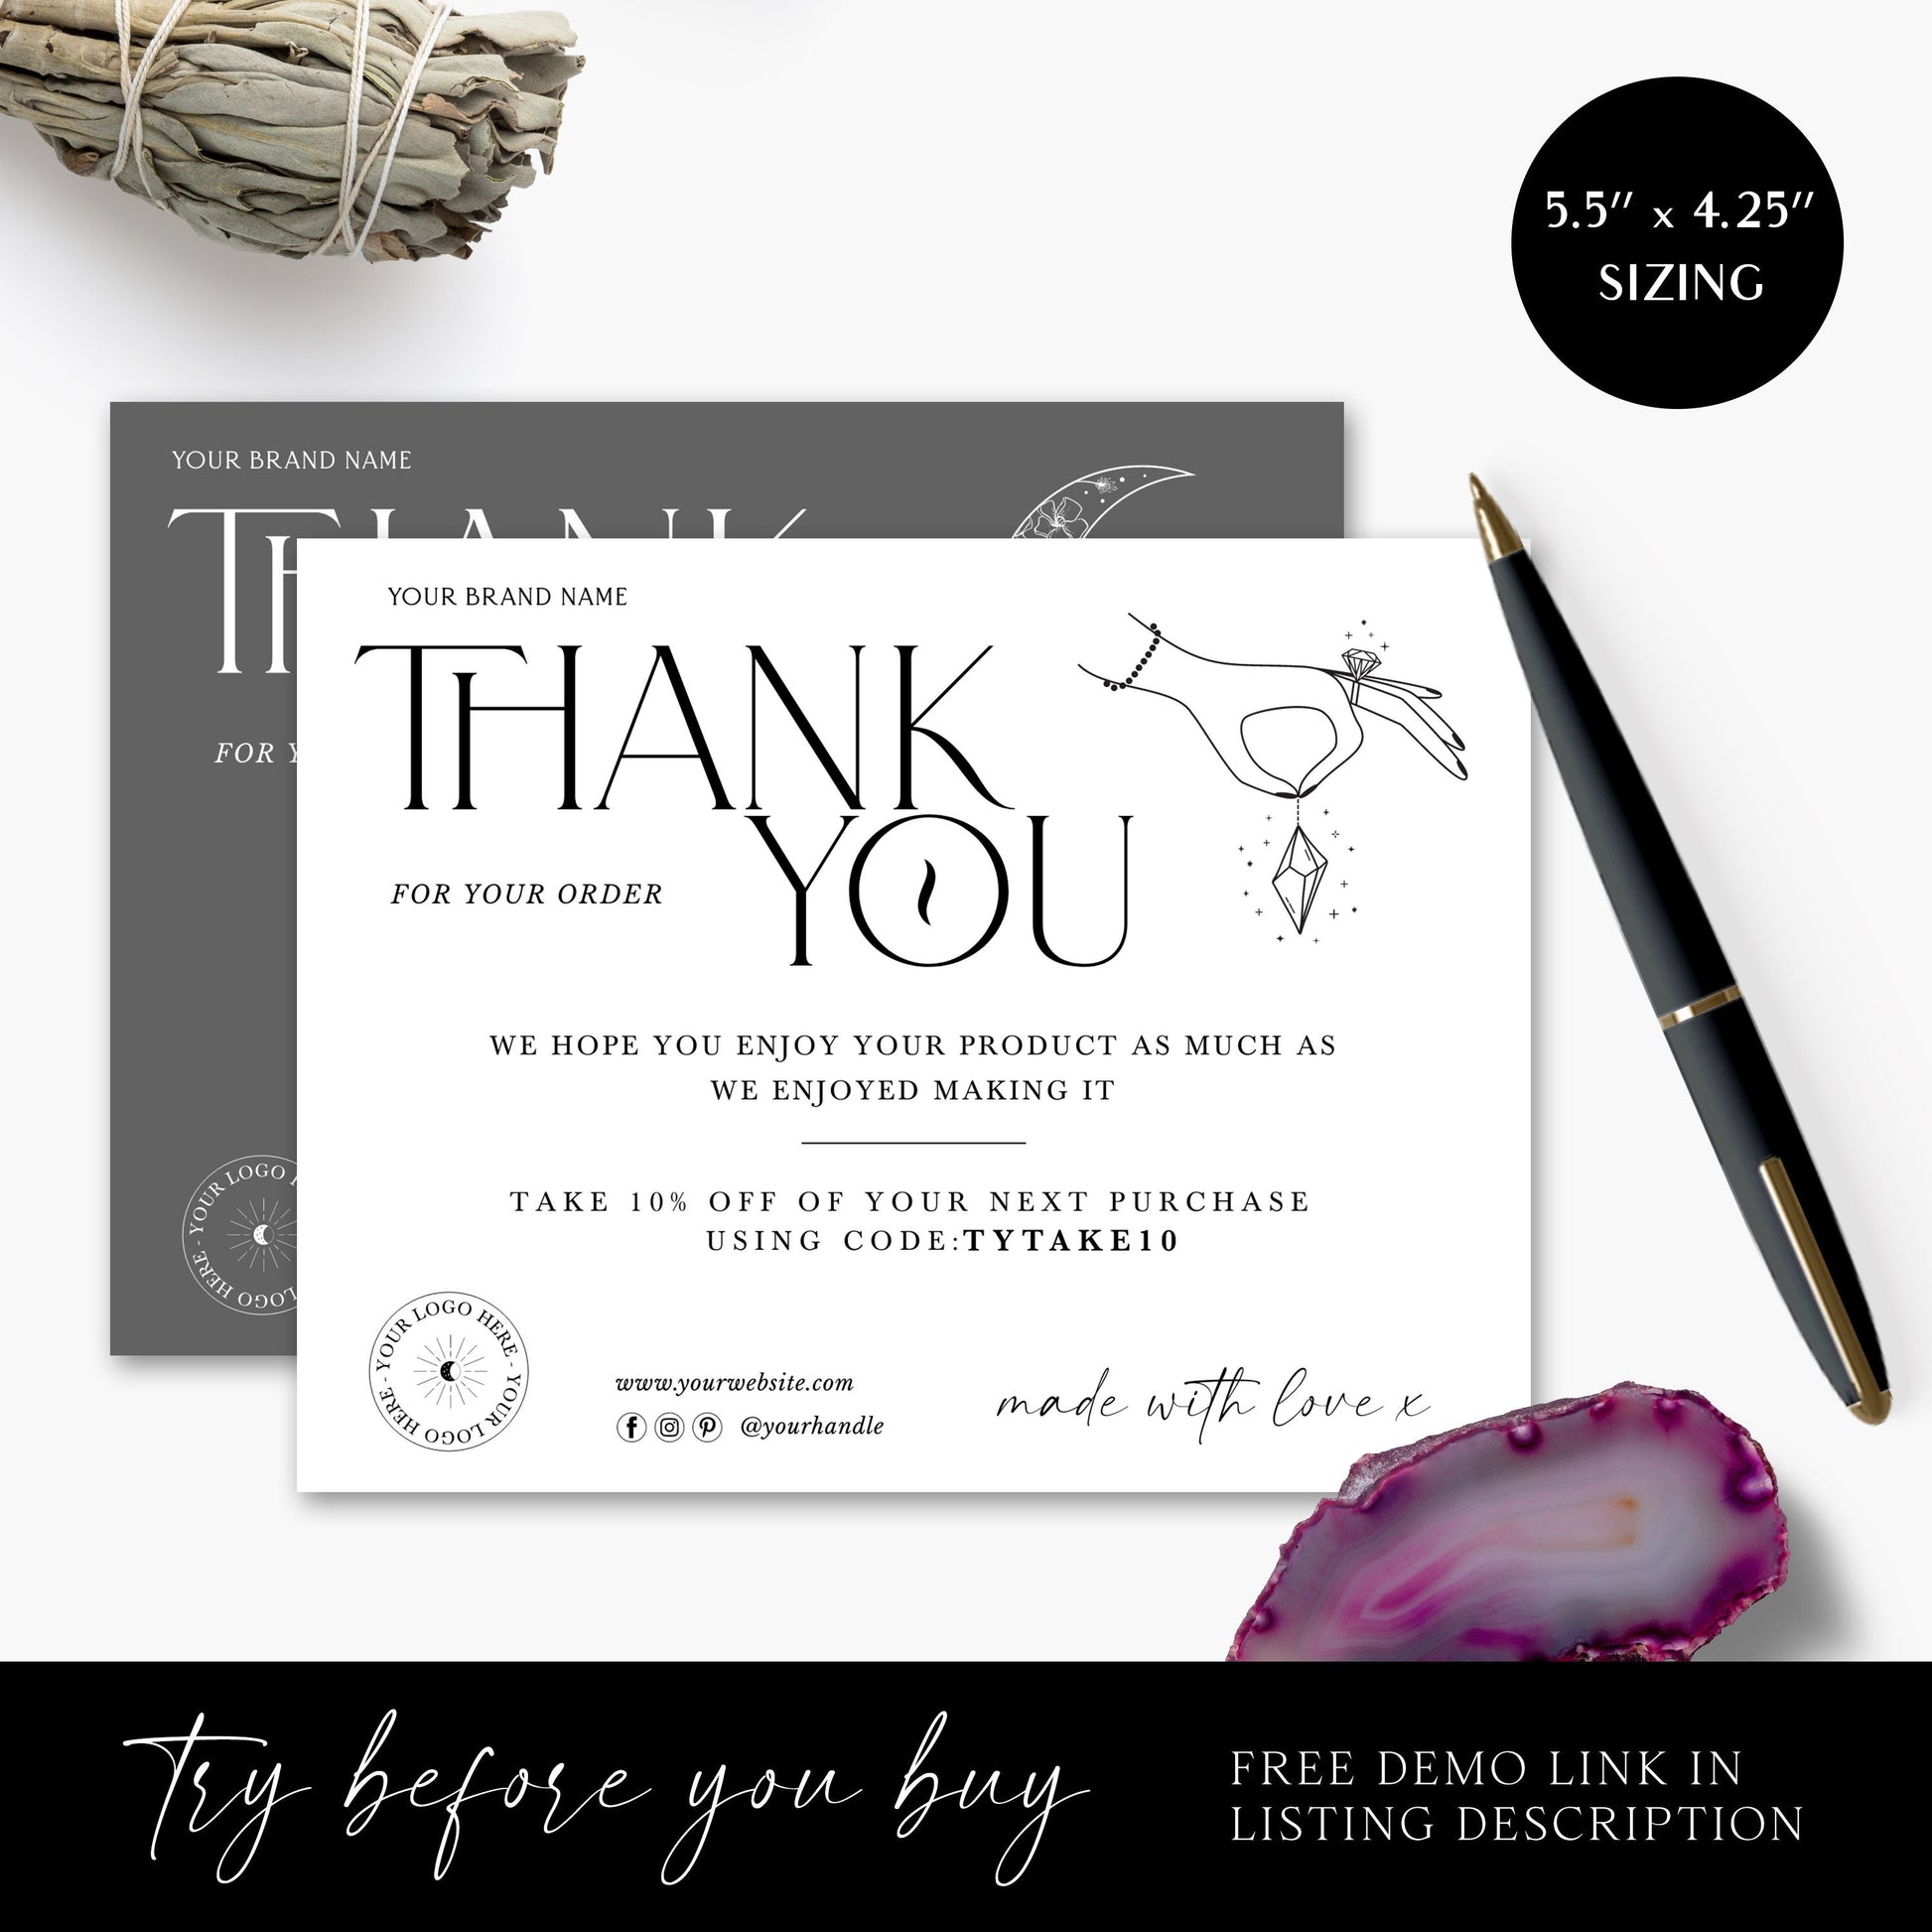 Editable Thank You Card Template, DIY Edit Thank You For Your Business Card, Spiritual Candle, Premade Etsy Customer Thank you Note SPI-001